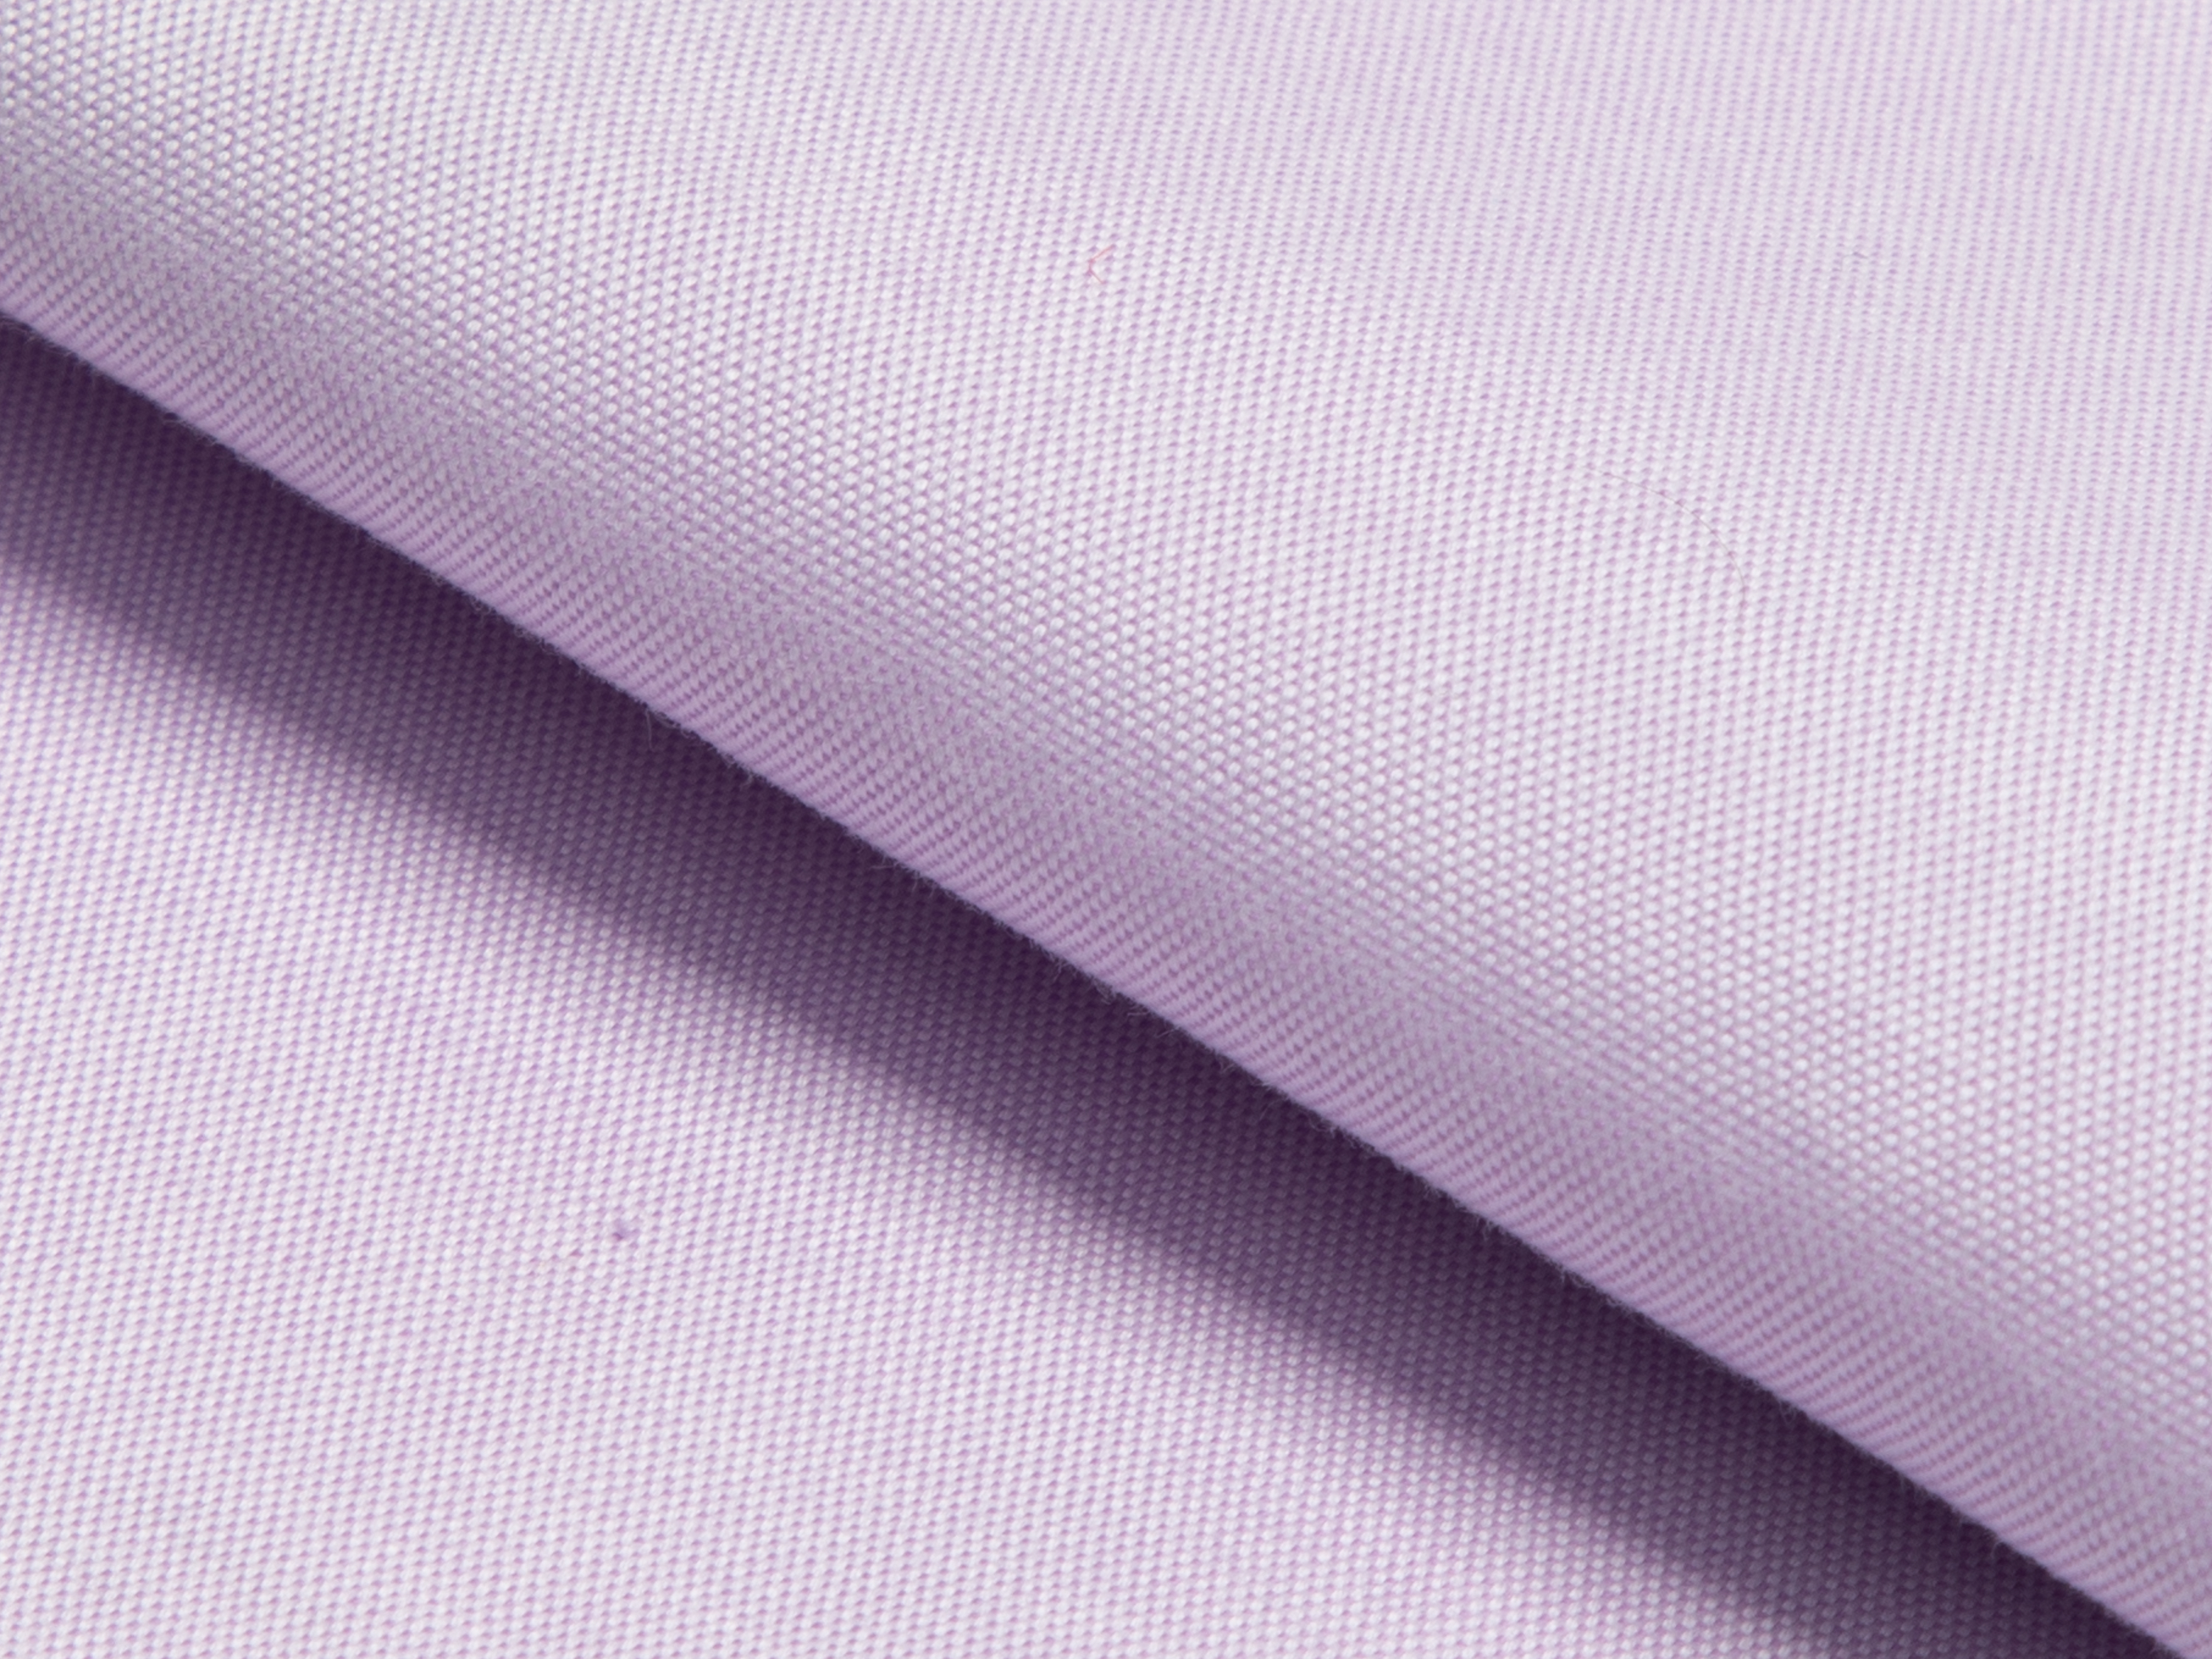 Buy tailor made shirts online - PINPOINT LUXURY - Pinpoint Lilac